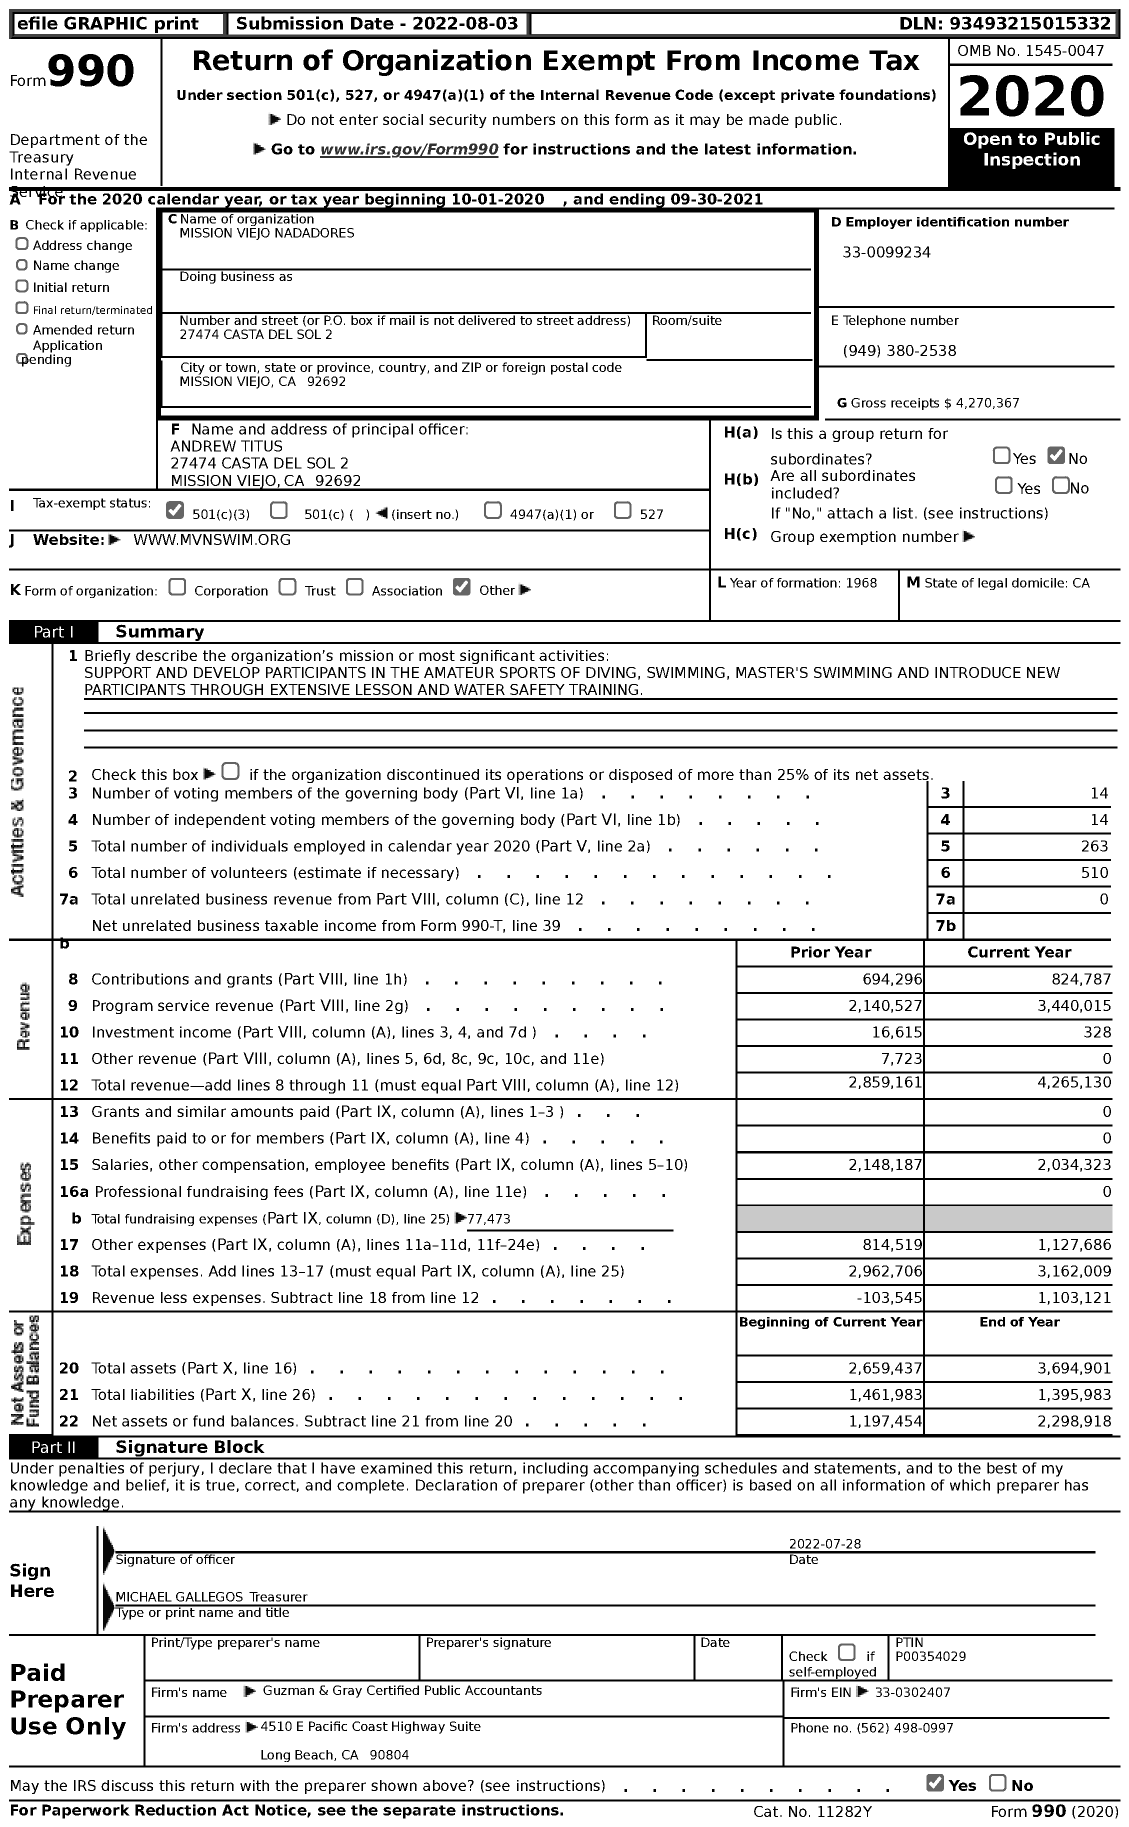 Image of first page of 2020 Form 990 for Mission Viejo Nadadores Foundation (MVN)